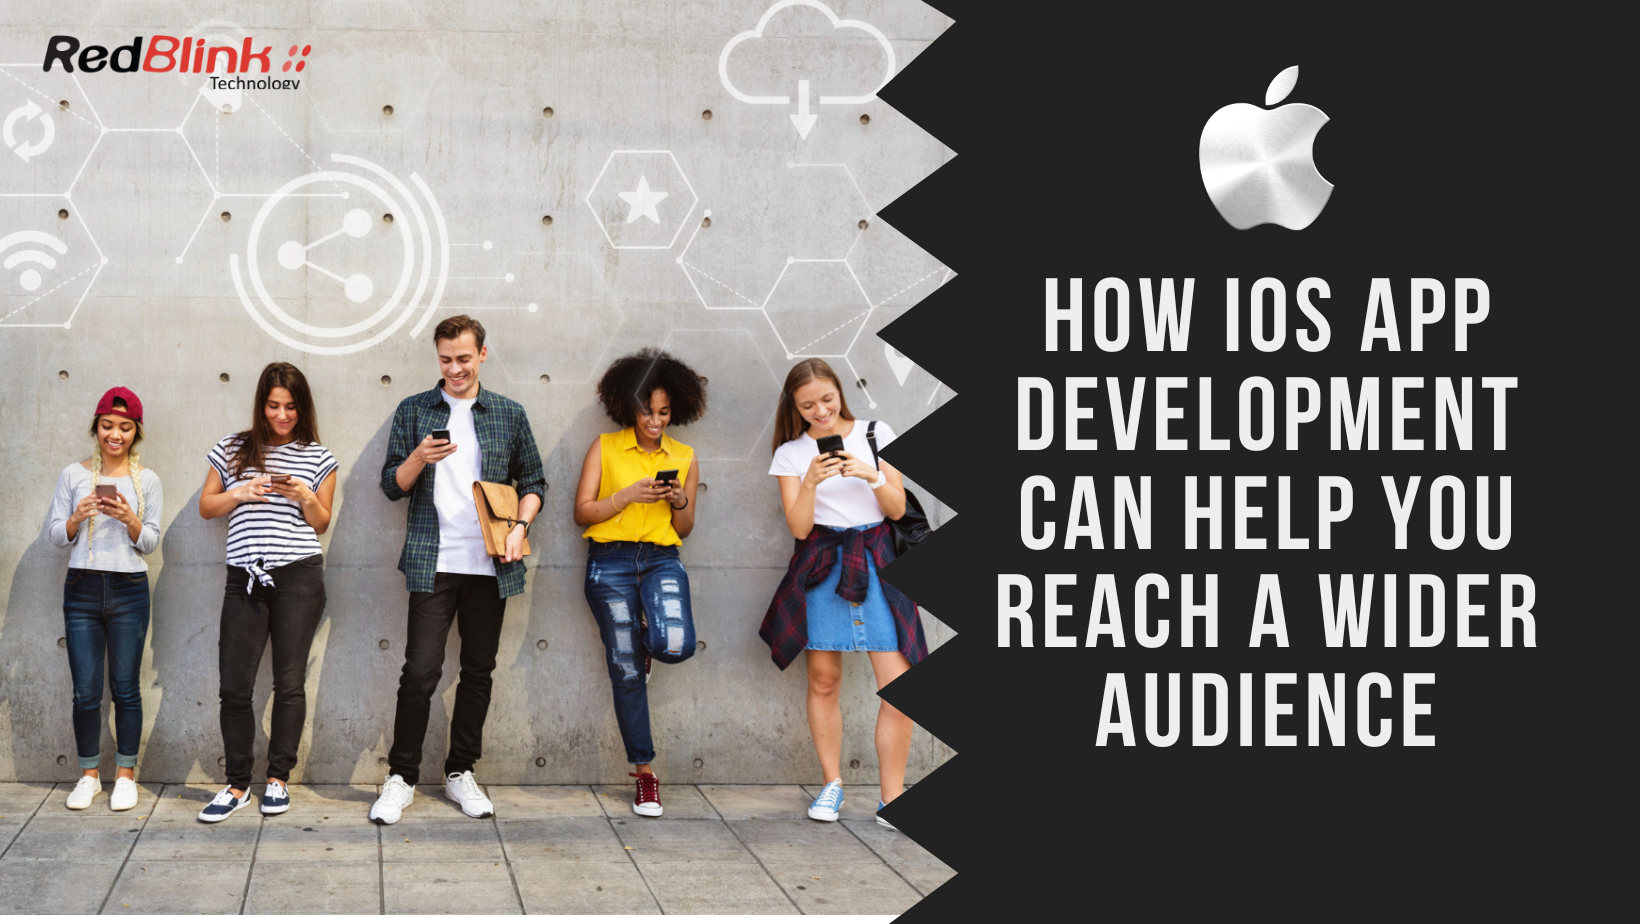 How iOS App Development Can Help You Reach a Wider Audience